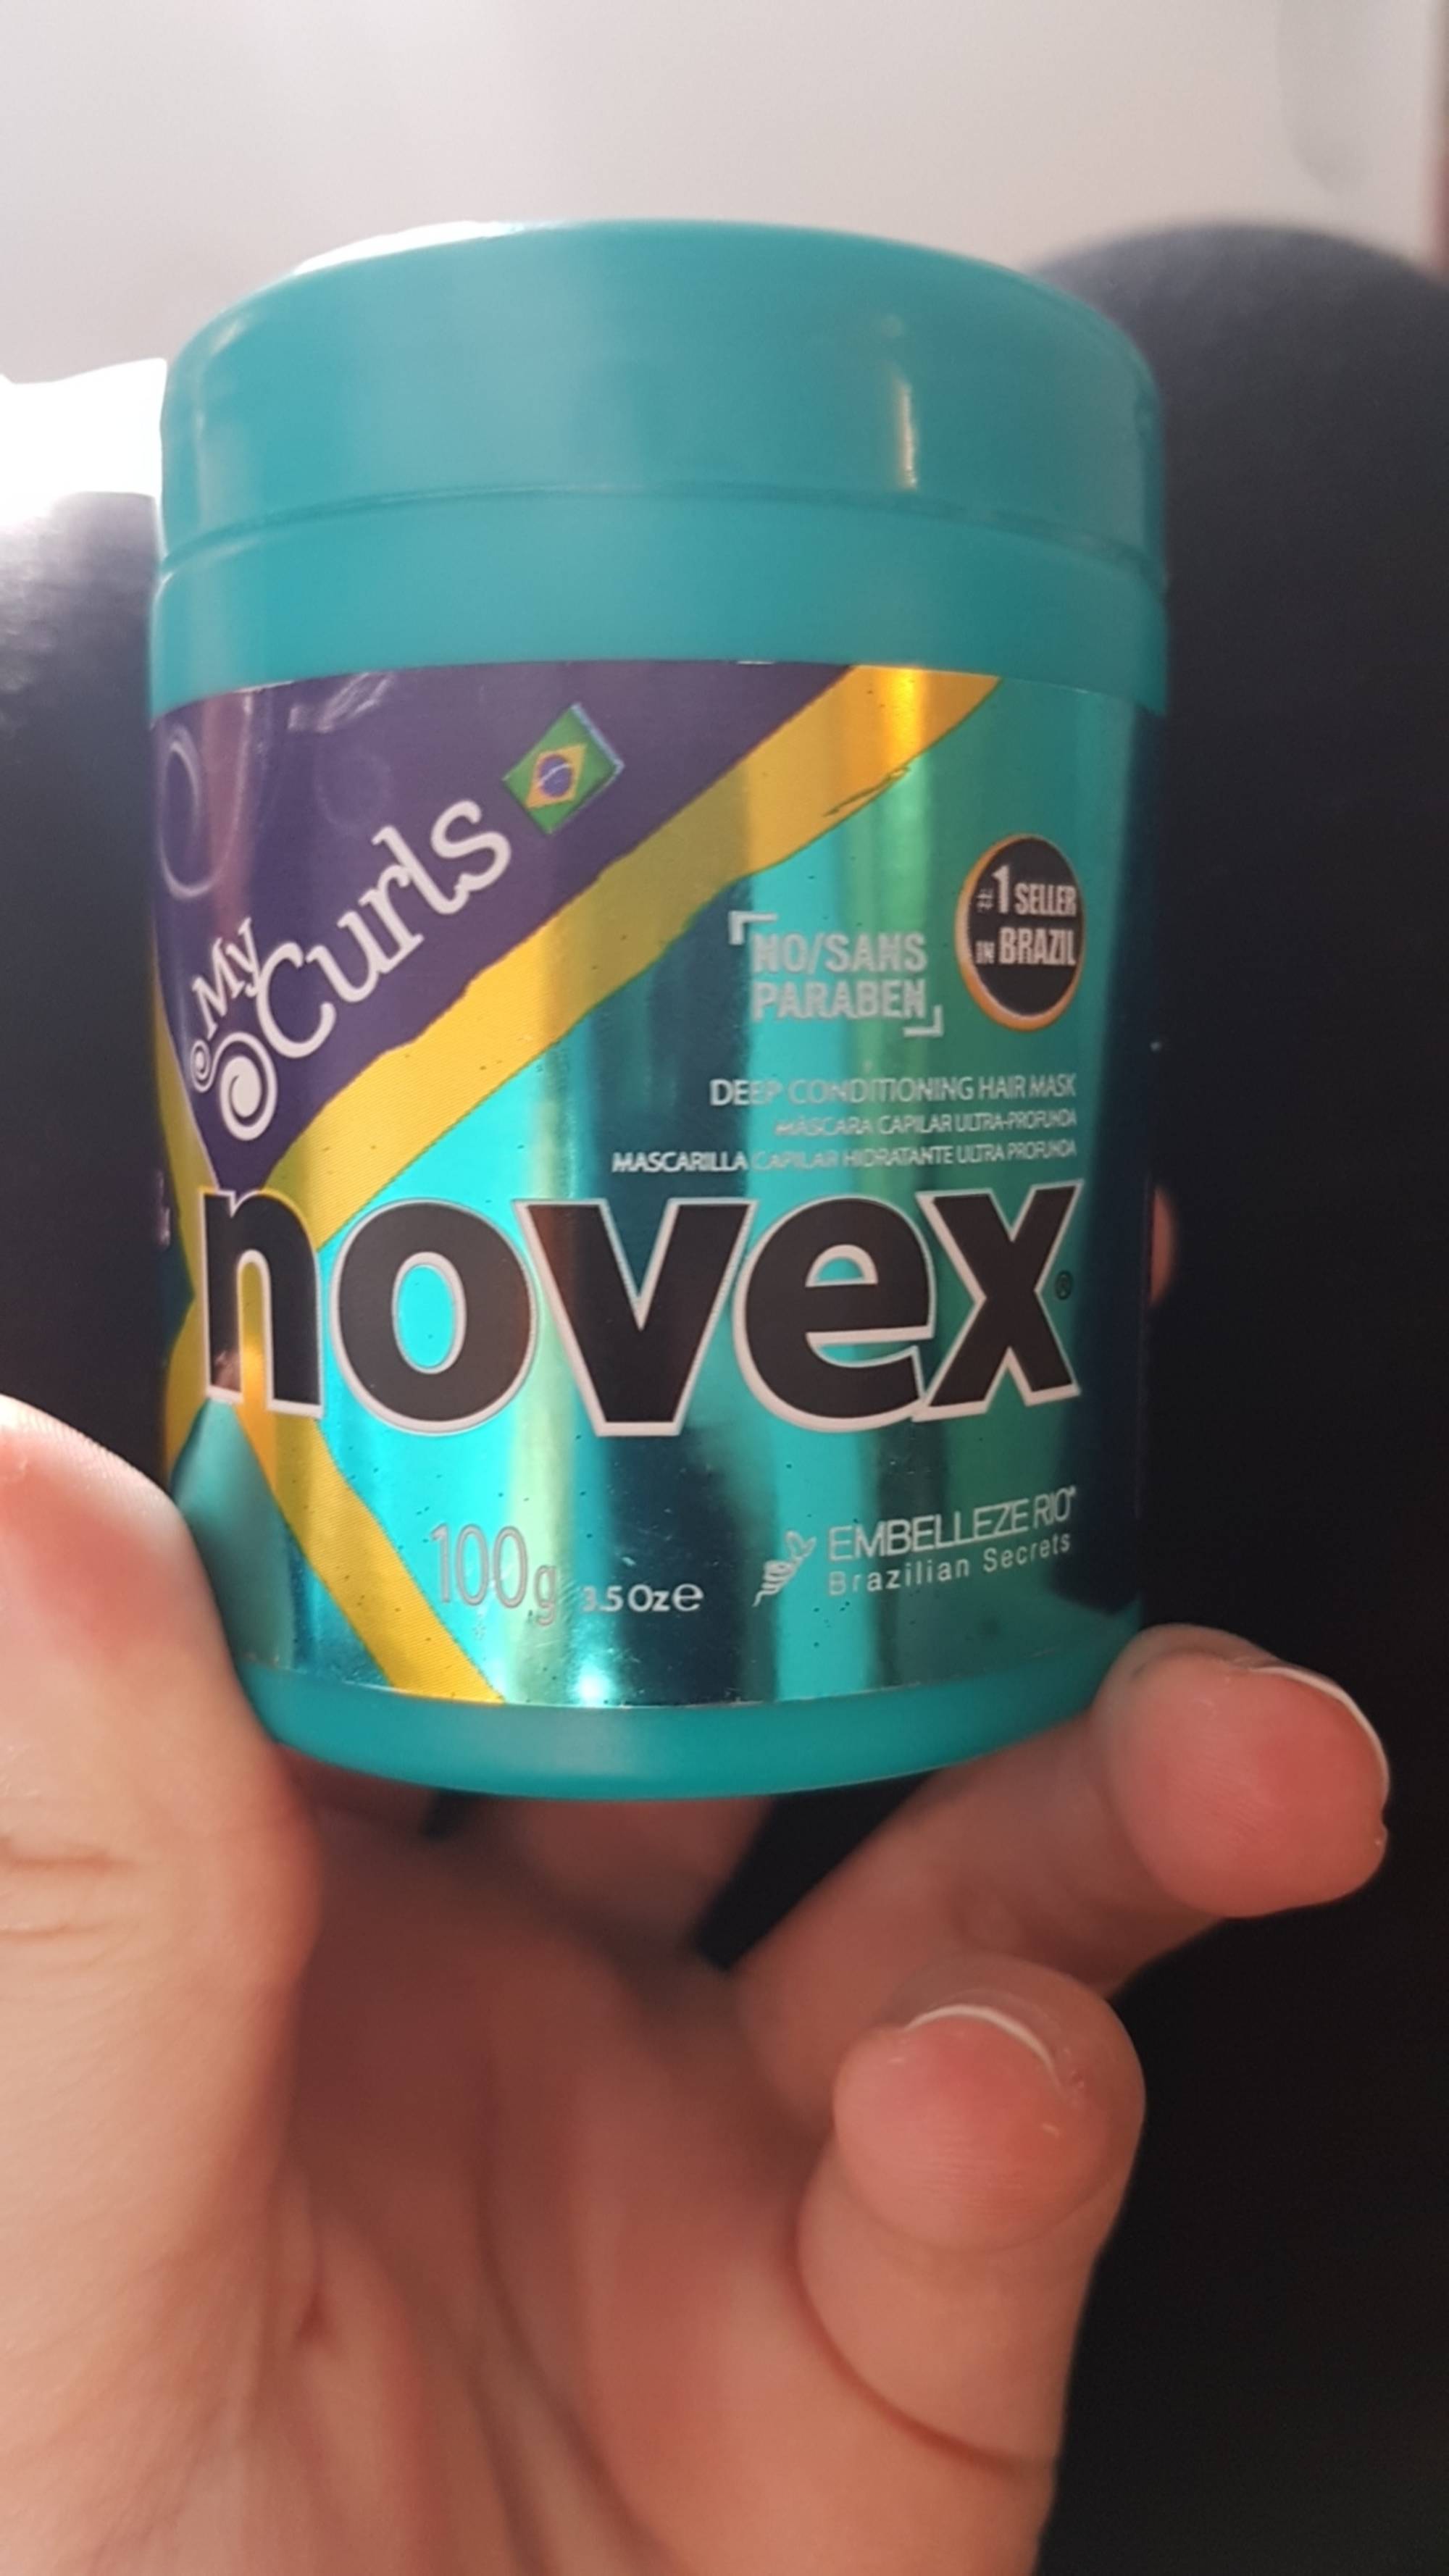 NOVEX - My curls - Deep conditioning hair mask